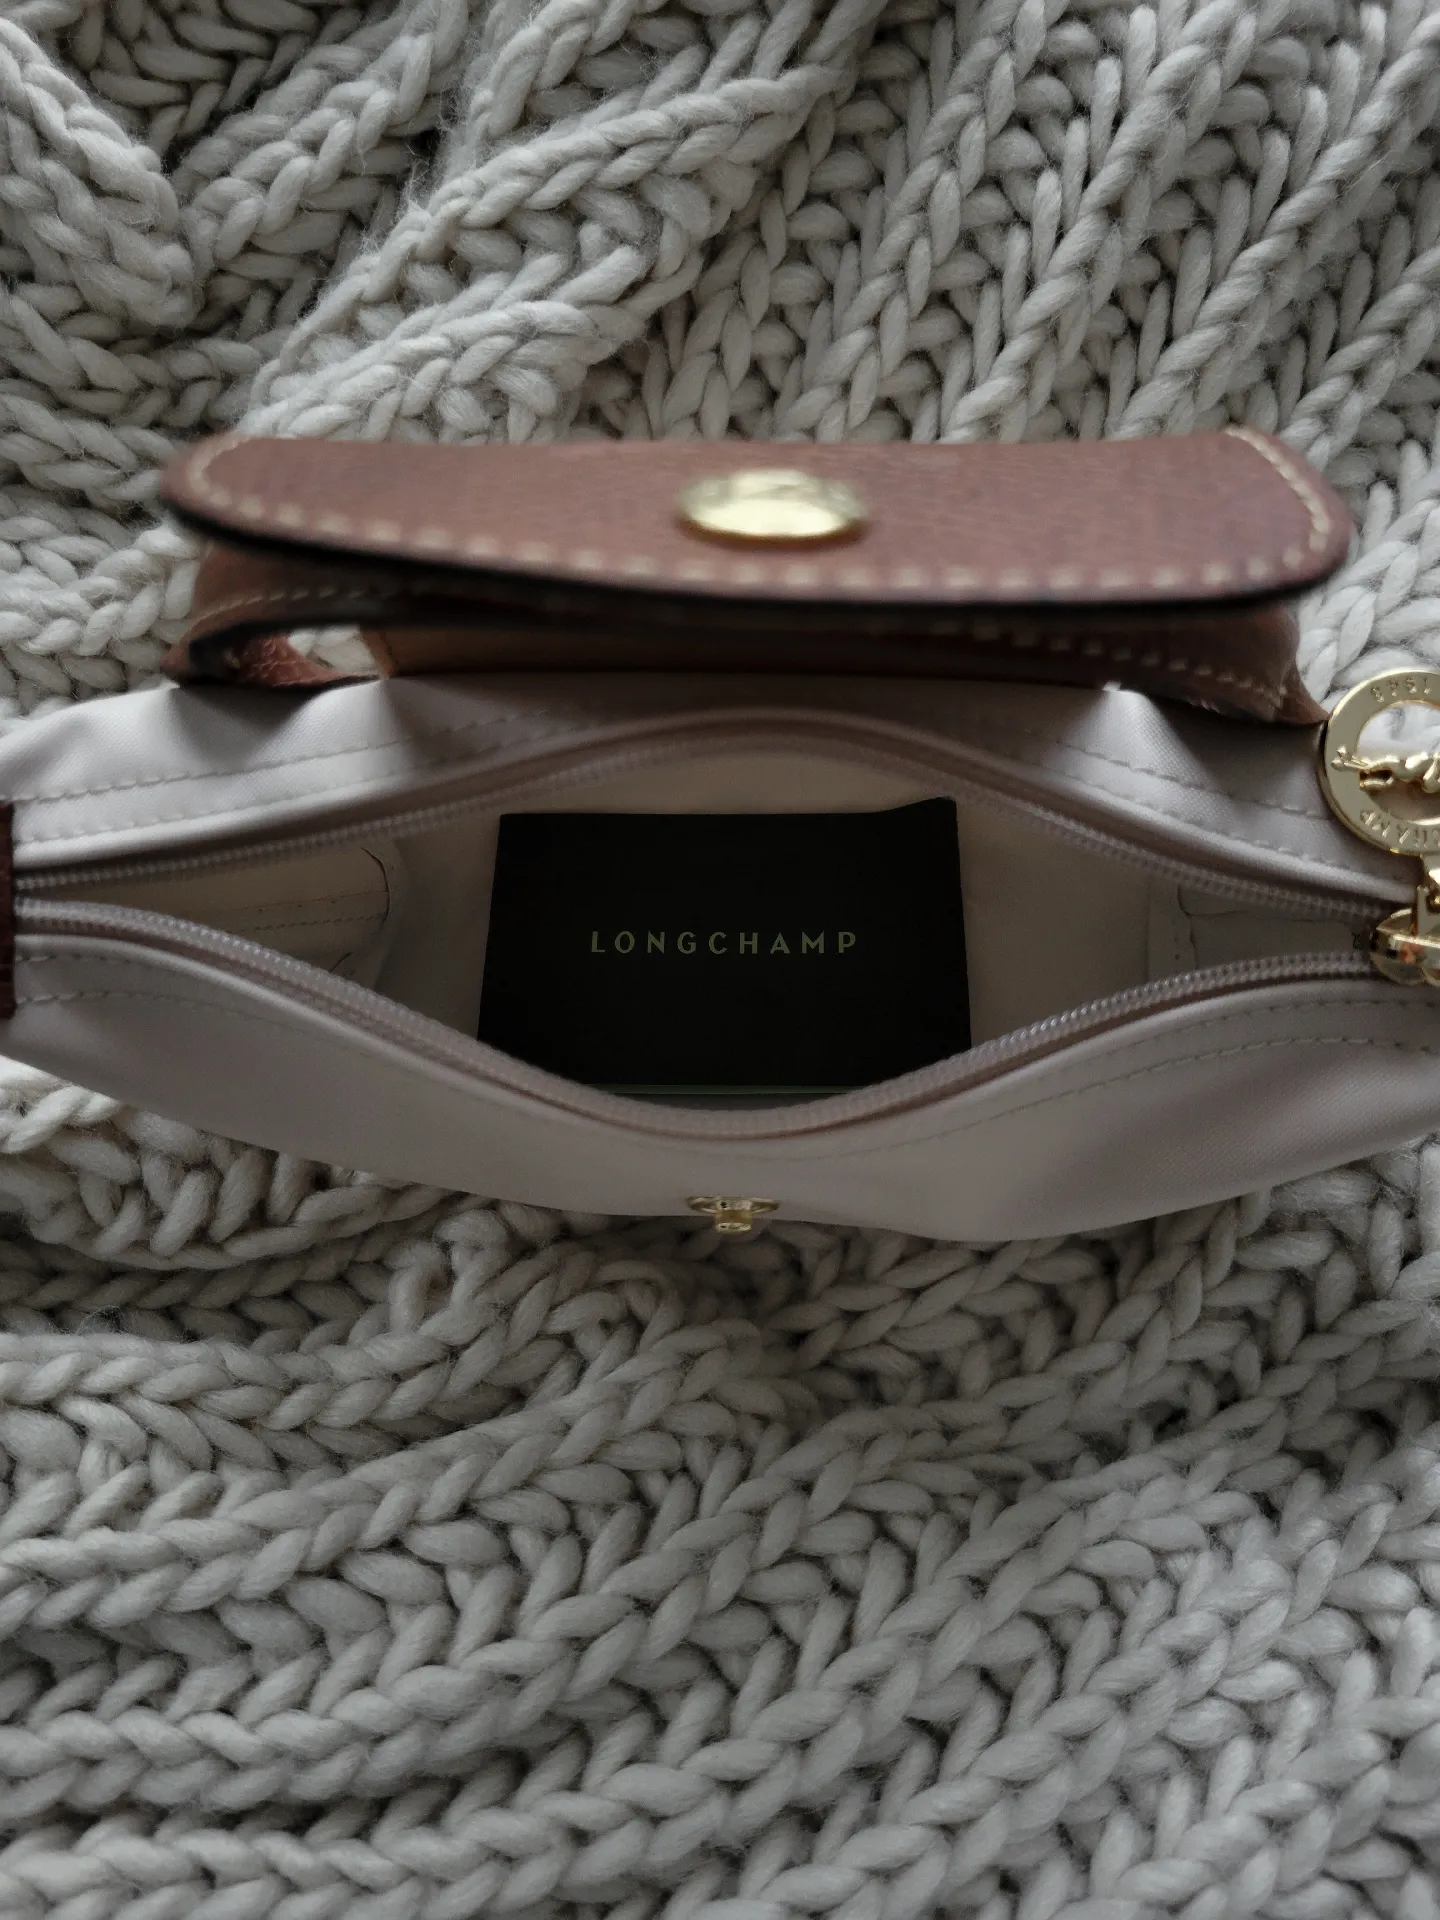 Unboxing the Longchamp Le Pliage Pouch with Handle